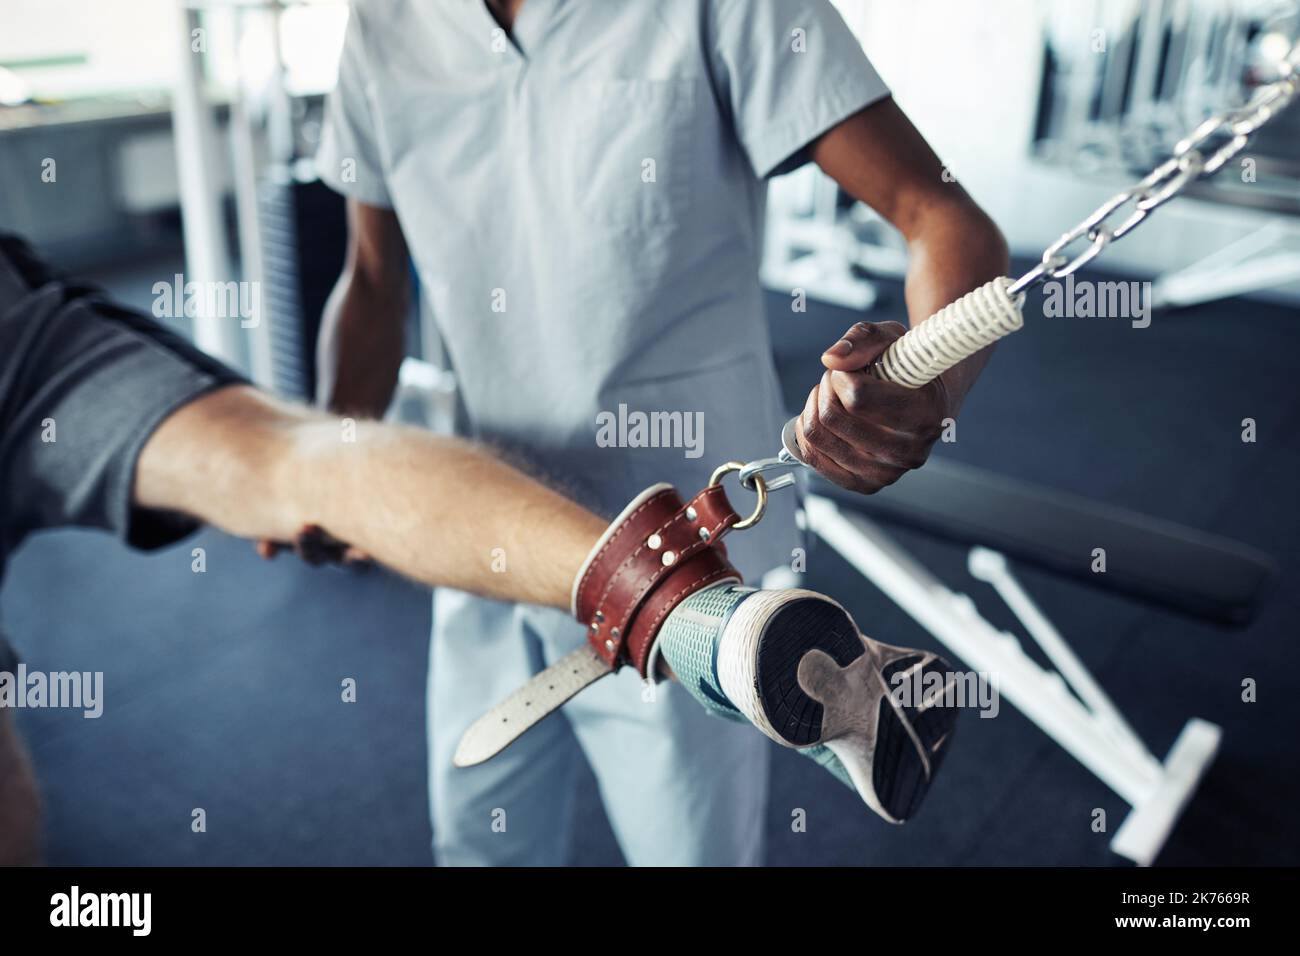 Close-up of patient training his leg on sport equipment together with nurse supporting him during their exercises in gym Stock Photo